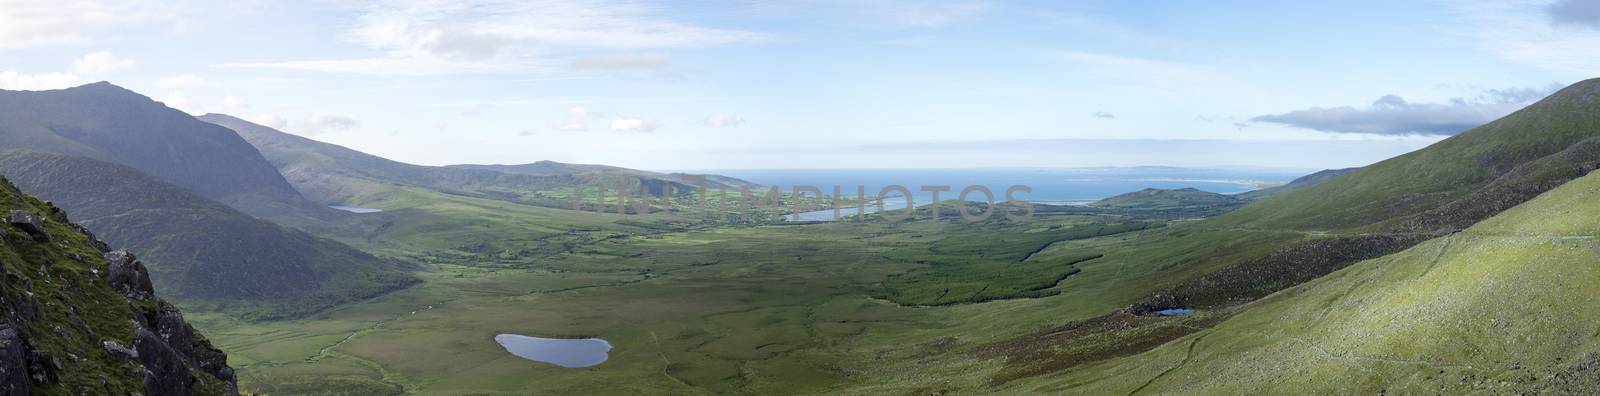 panoramic view of the mountains in county kerry by morrbyte